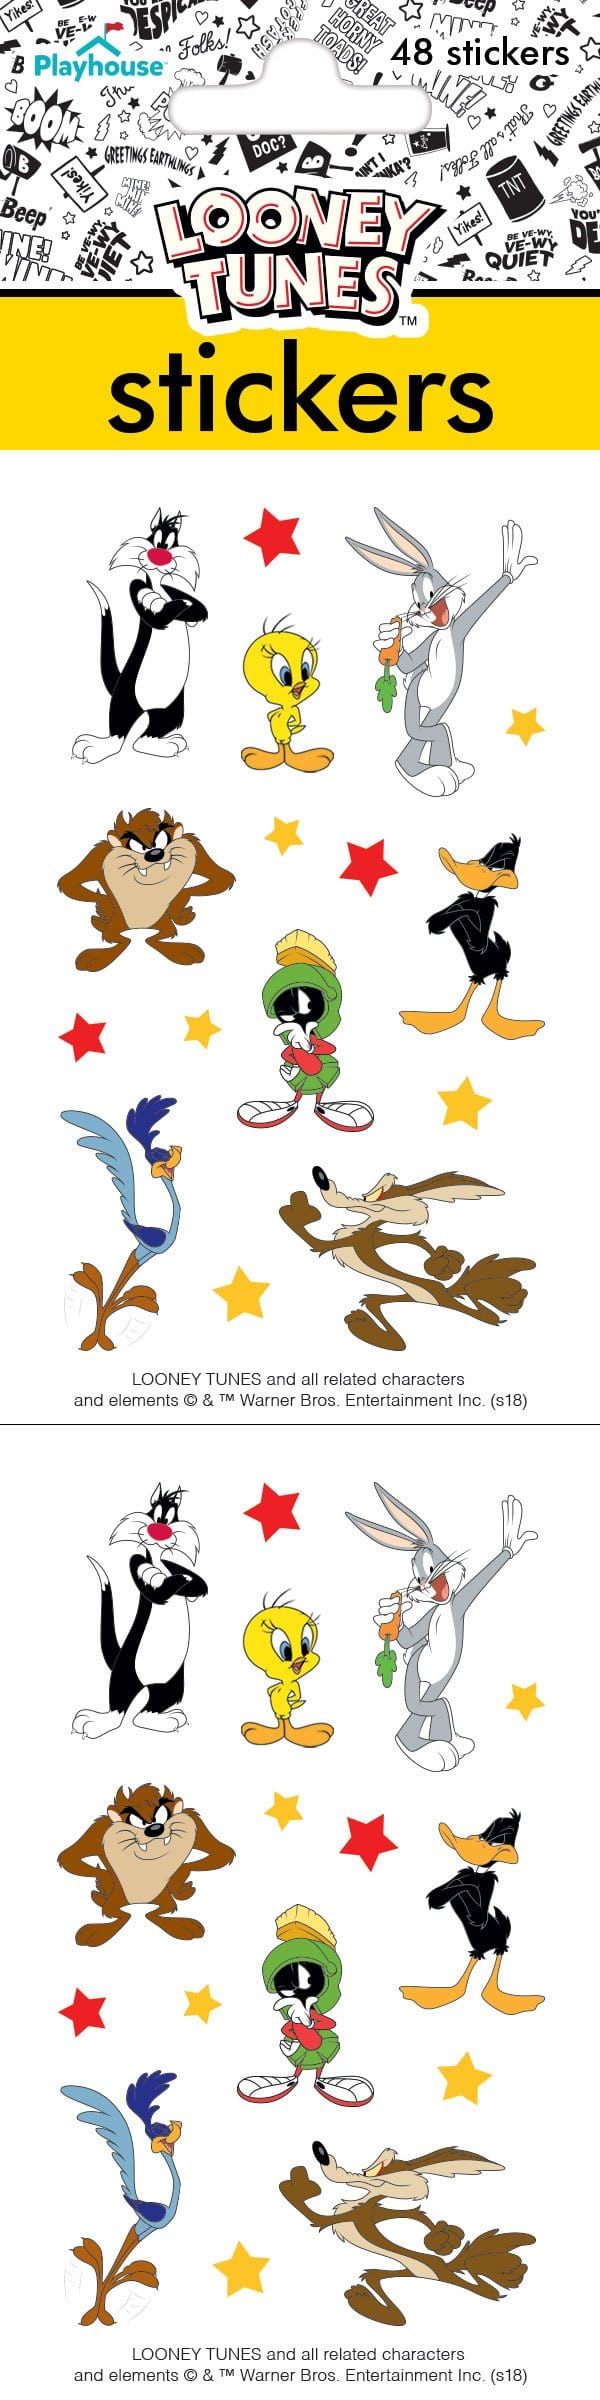 stickers featuring looney tunes characters, shown in package.